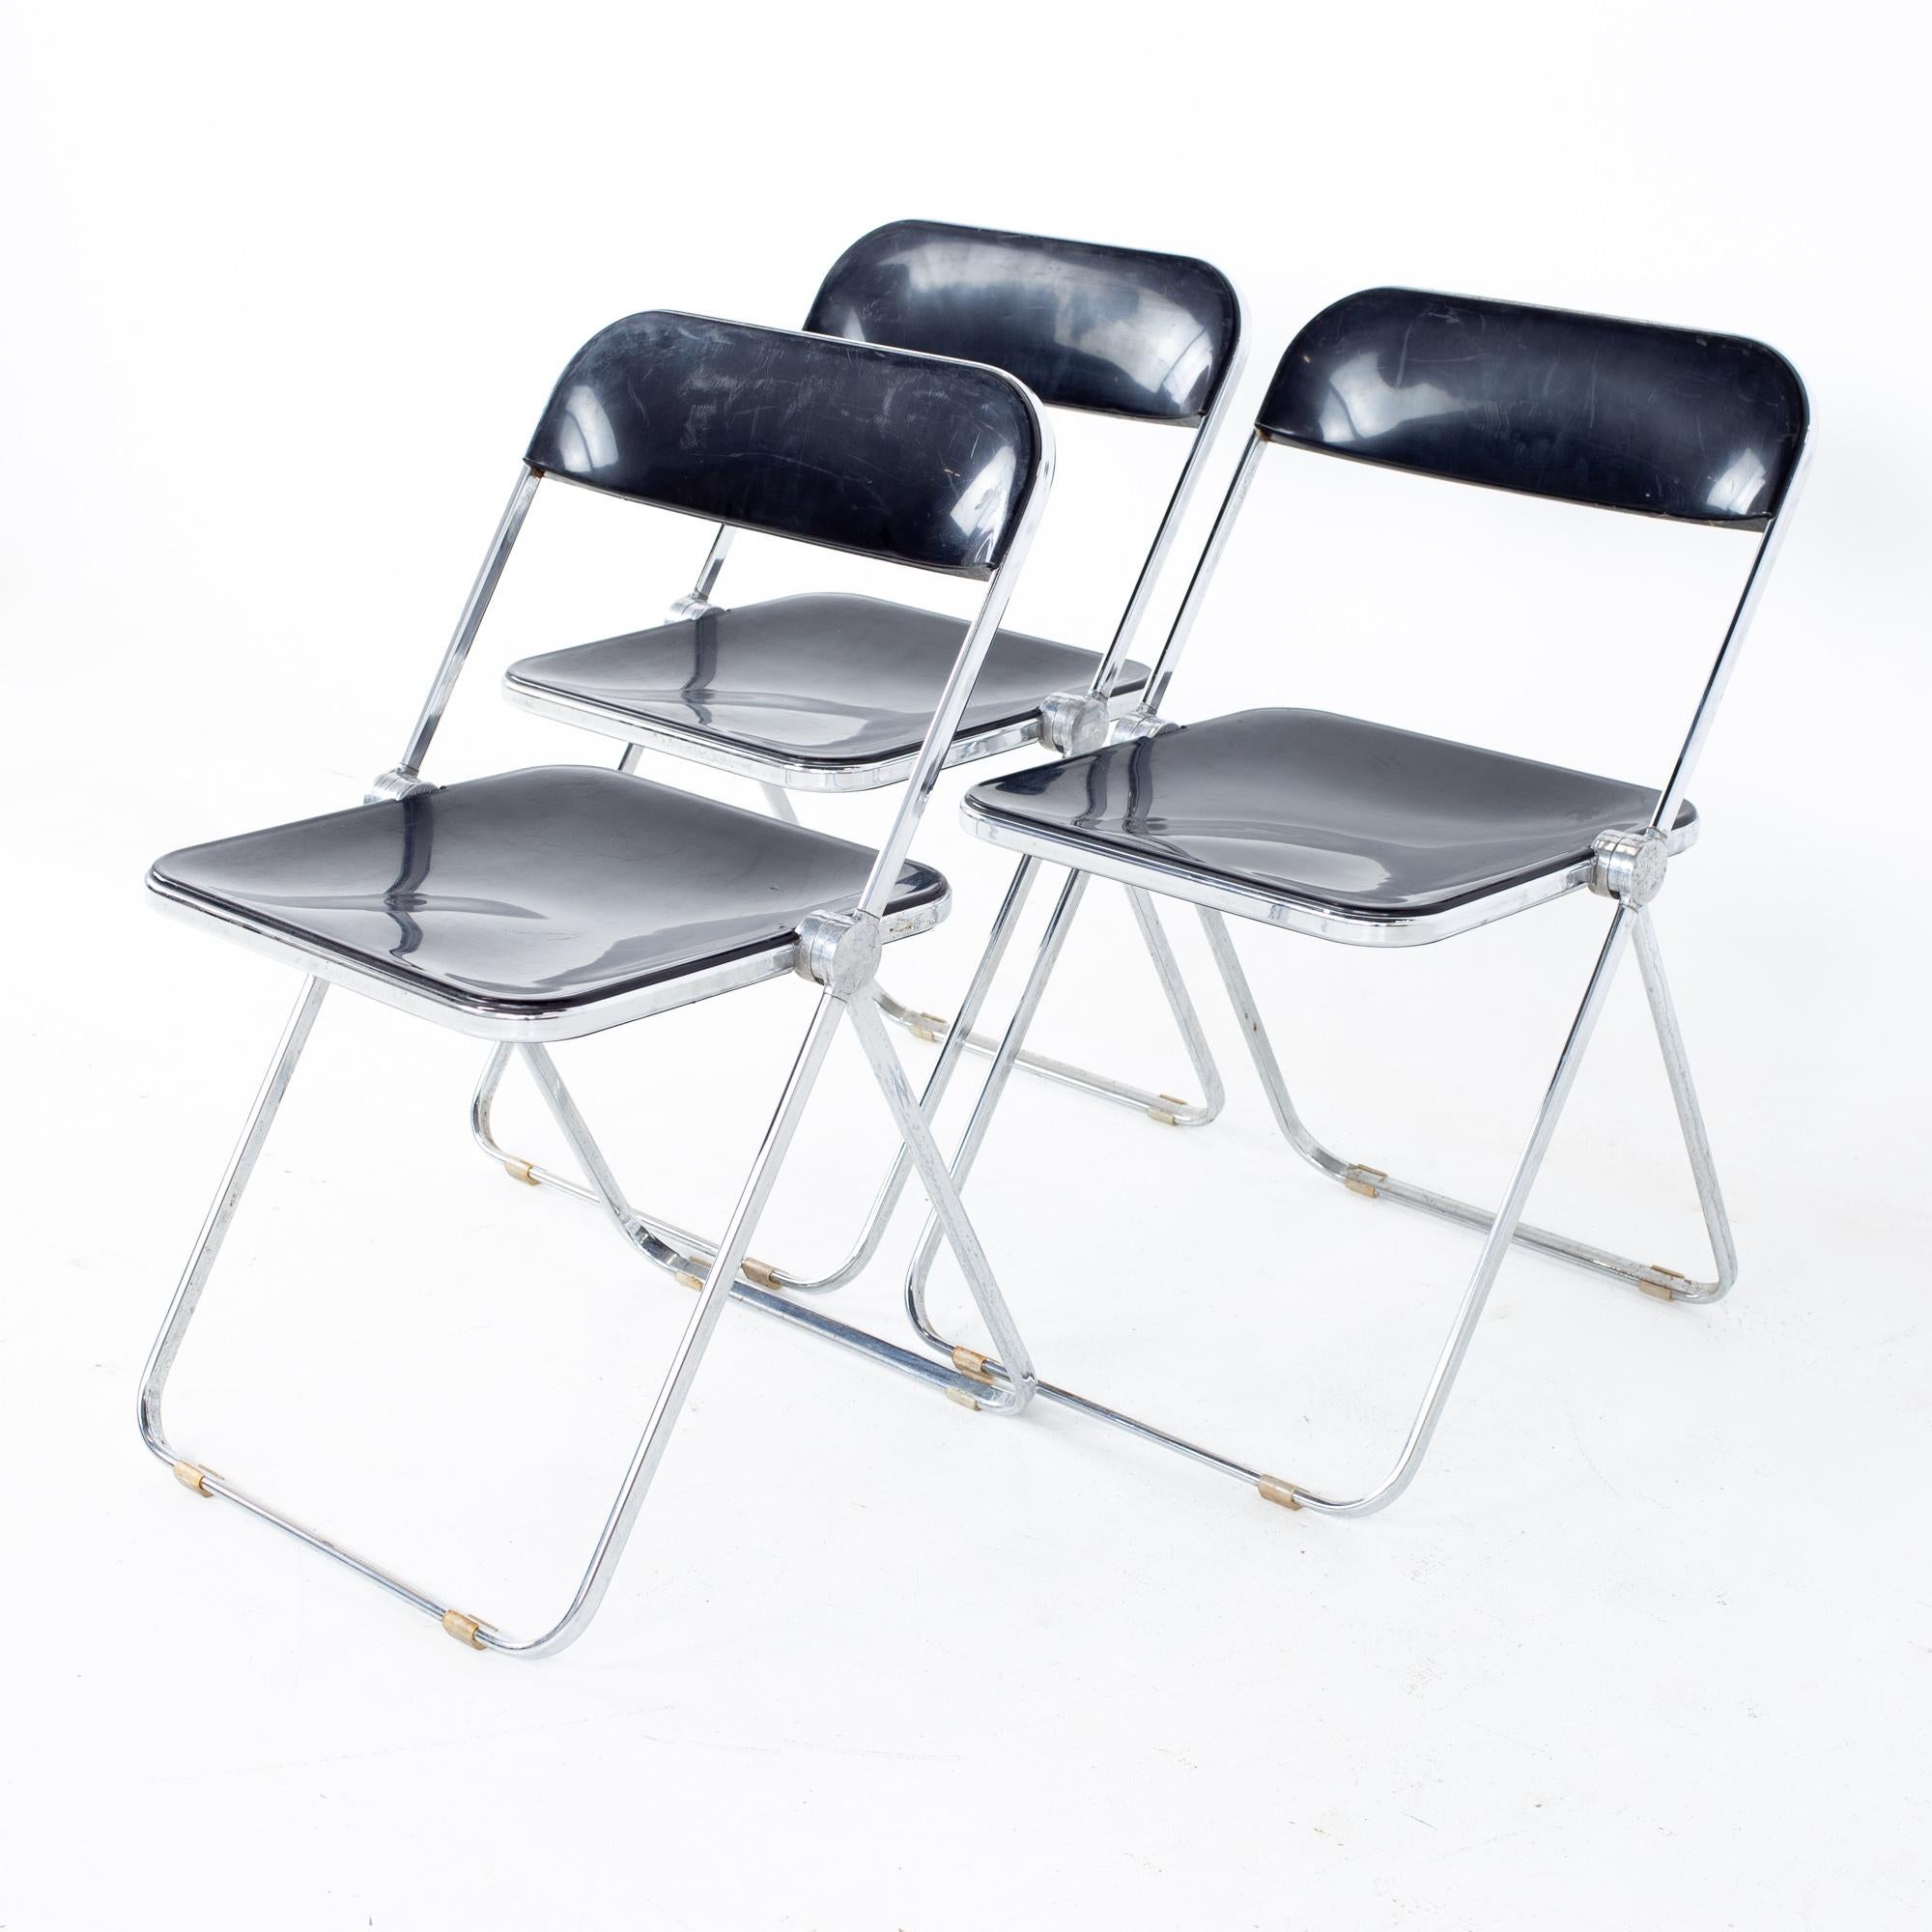 Giancarlo Piretti Anonima Castelli style mid century smoked Lucite folding chairs - Set of 3
Each chair measures: 18.5 wide x 19.25 deep x 29.5 high, with a seat height of 17.5 inches

All pieces of furniture can be had in what we call restored